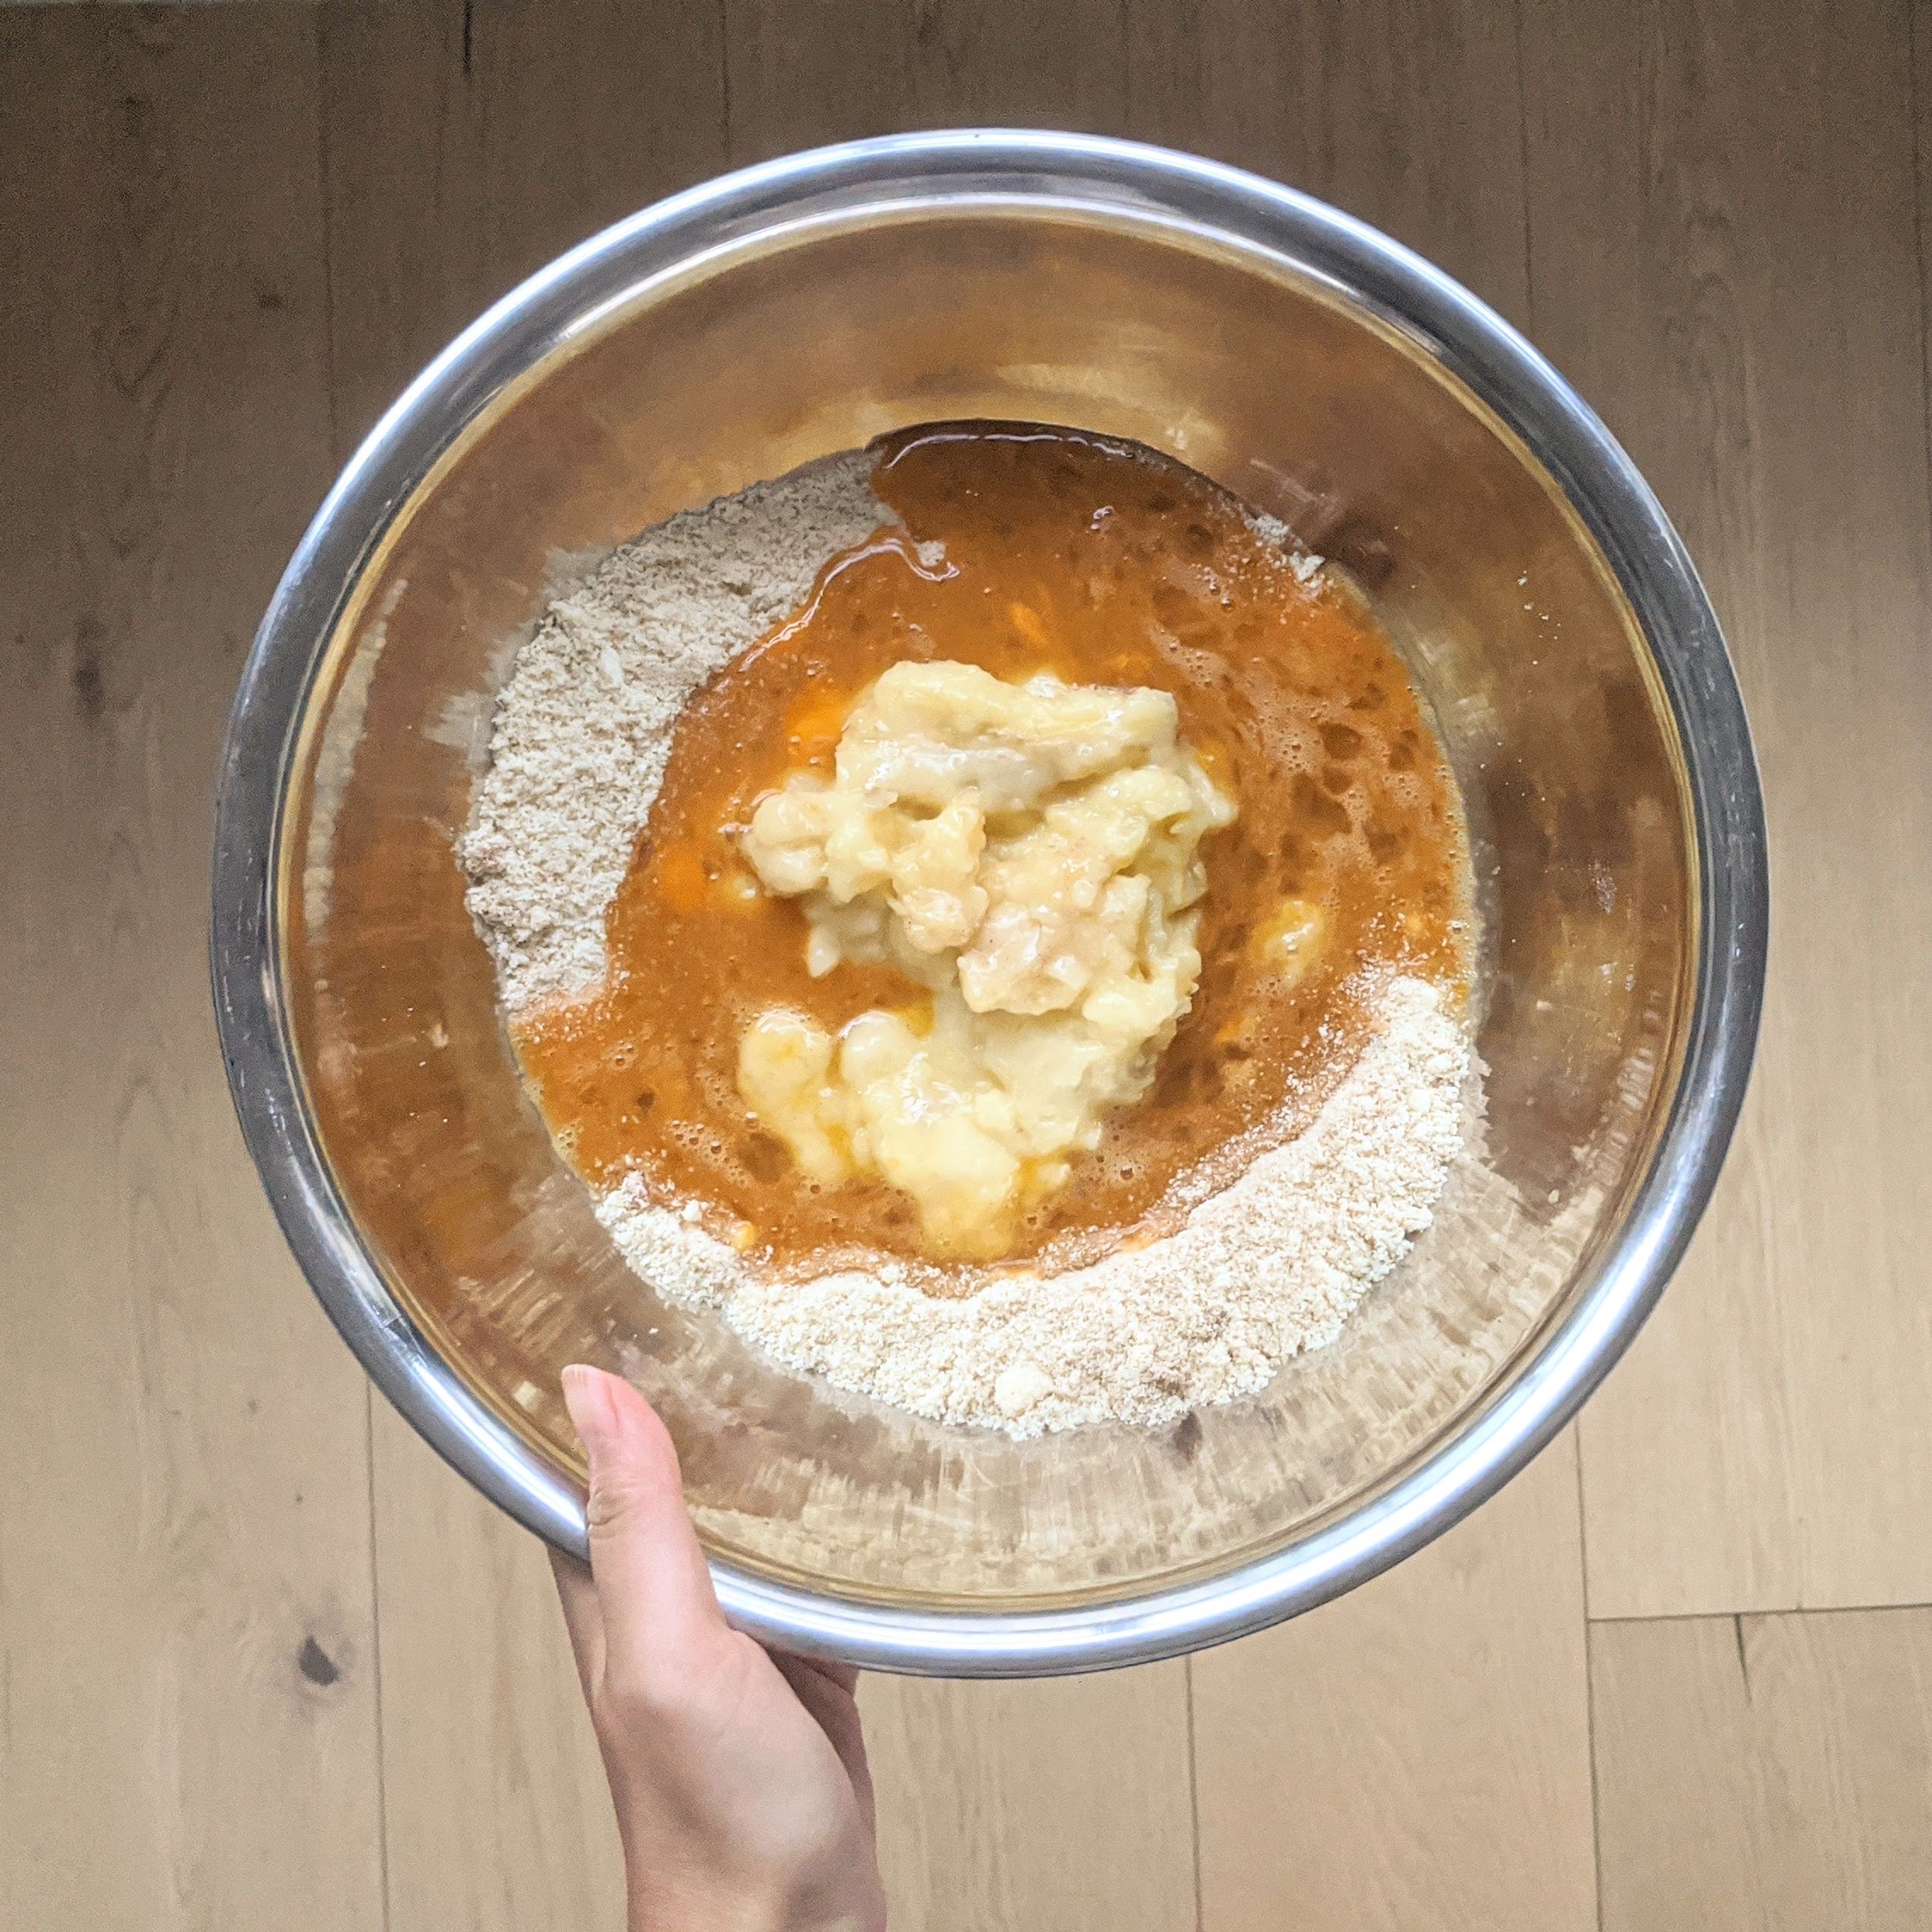 In a large mixing bowl, combine the flours, monk fruit, spices, baking powder and bicarbonate soda.